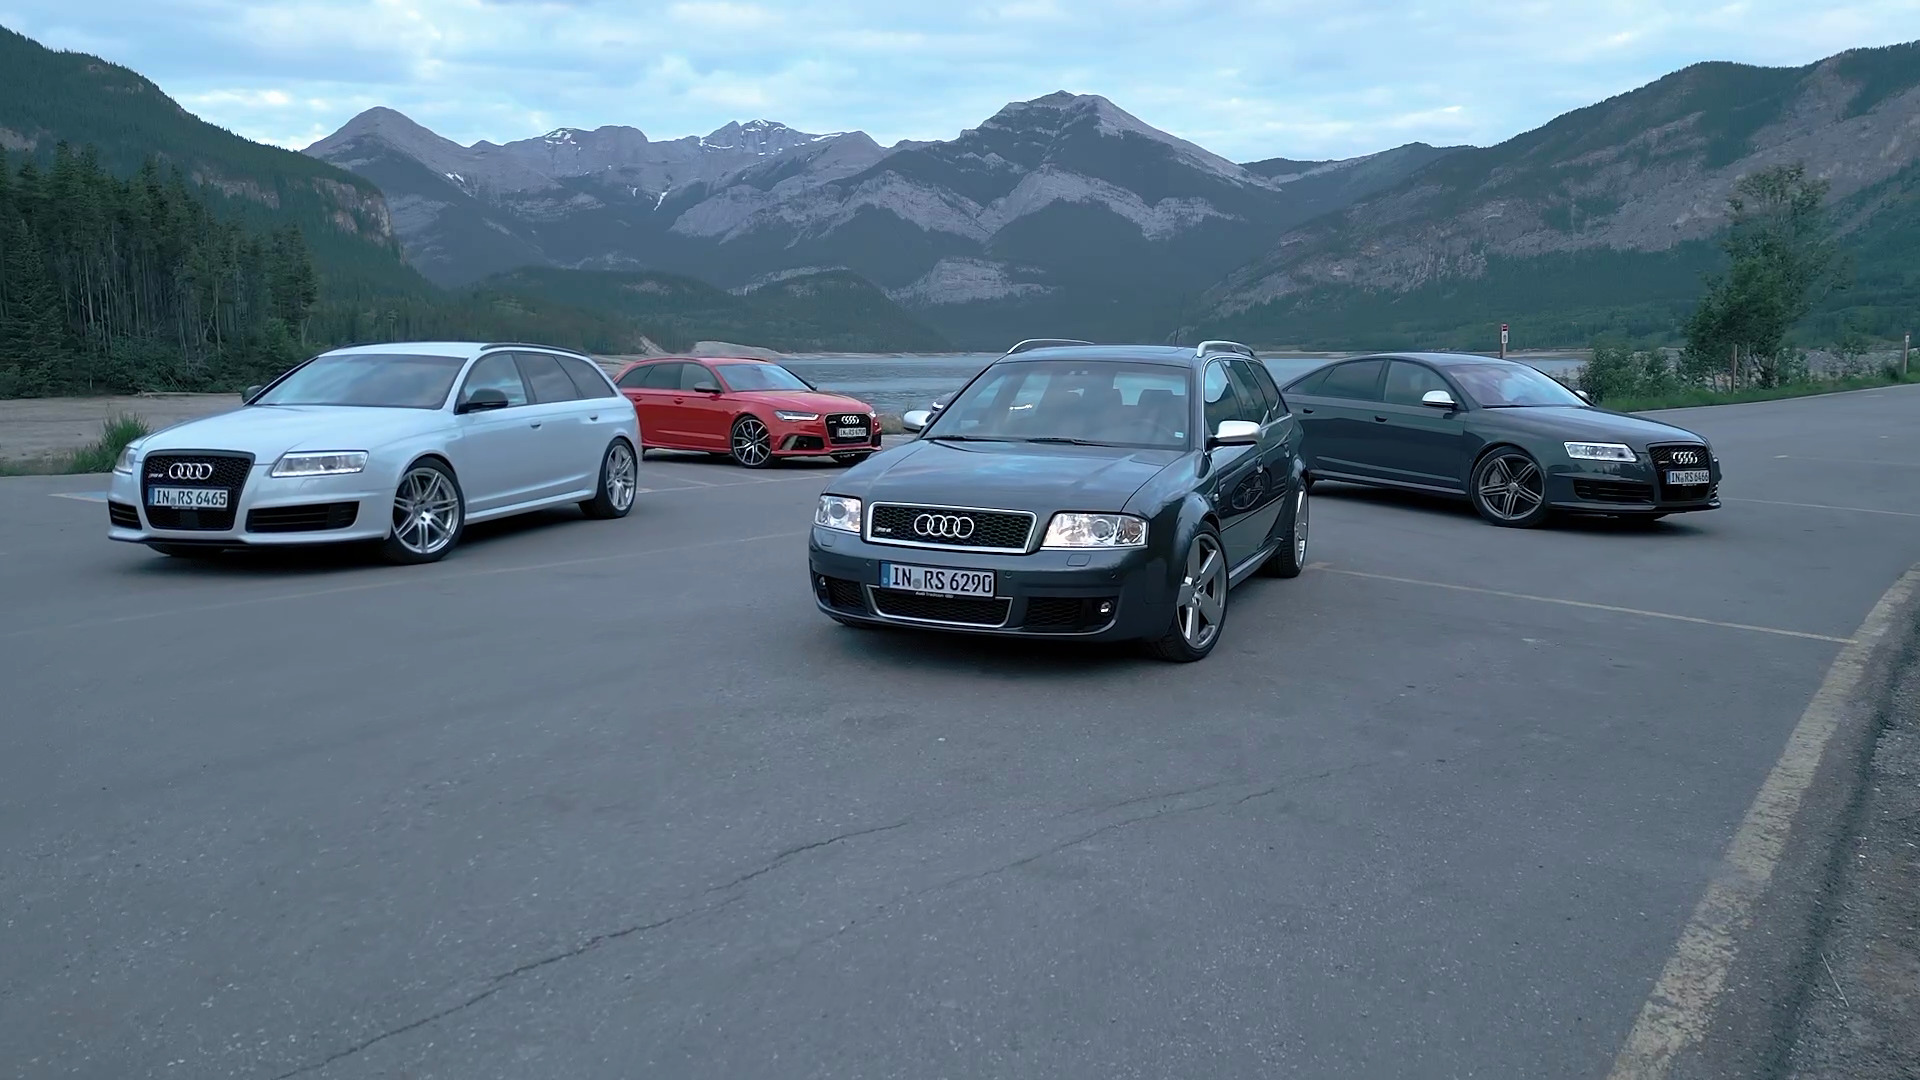 Audi A6 History, Generations, Models, S6, RS6 & More: Evolution of